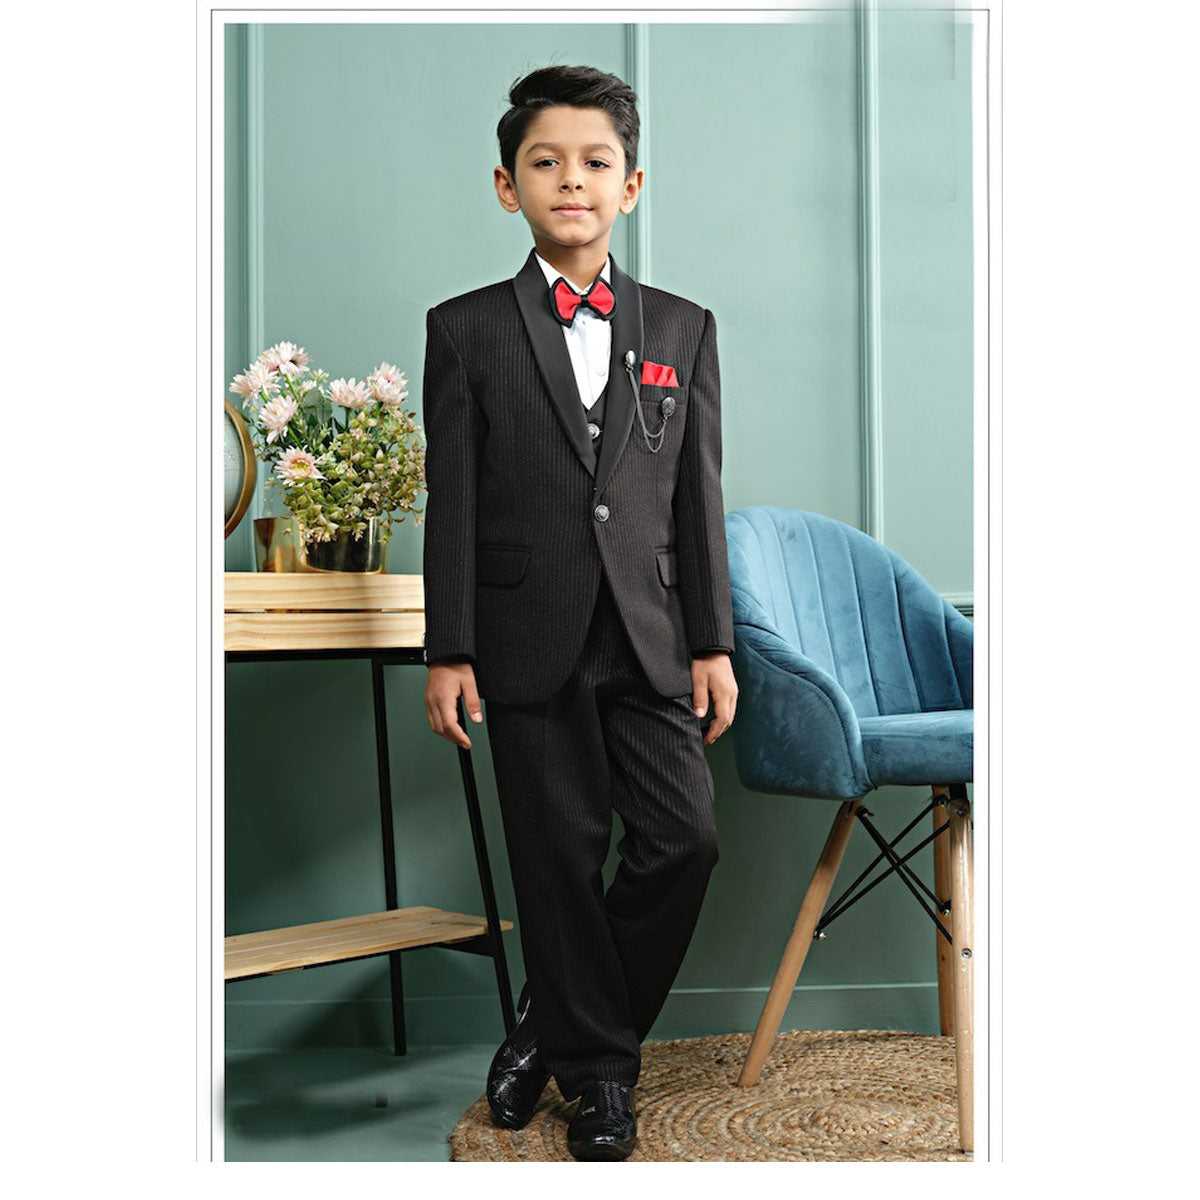 Stylish 2021 White Tuxedo For Boys With Shawl Collar Perfect For Formal Wear,  Birthdays, Proms, And Parties Includes Jacket, Pants, Or Bow Tuxedo From  Bridalee, $36.09 | DHgate.Com